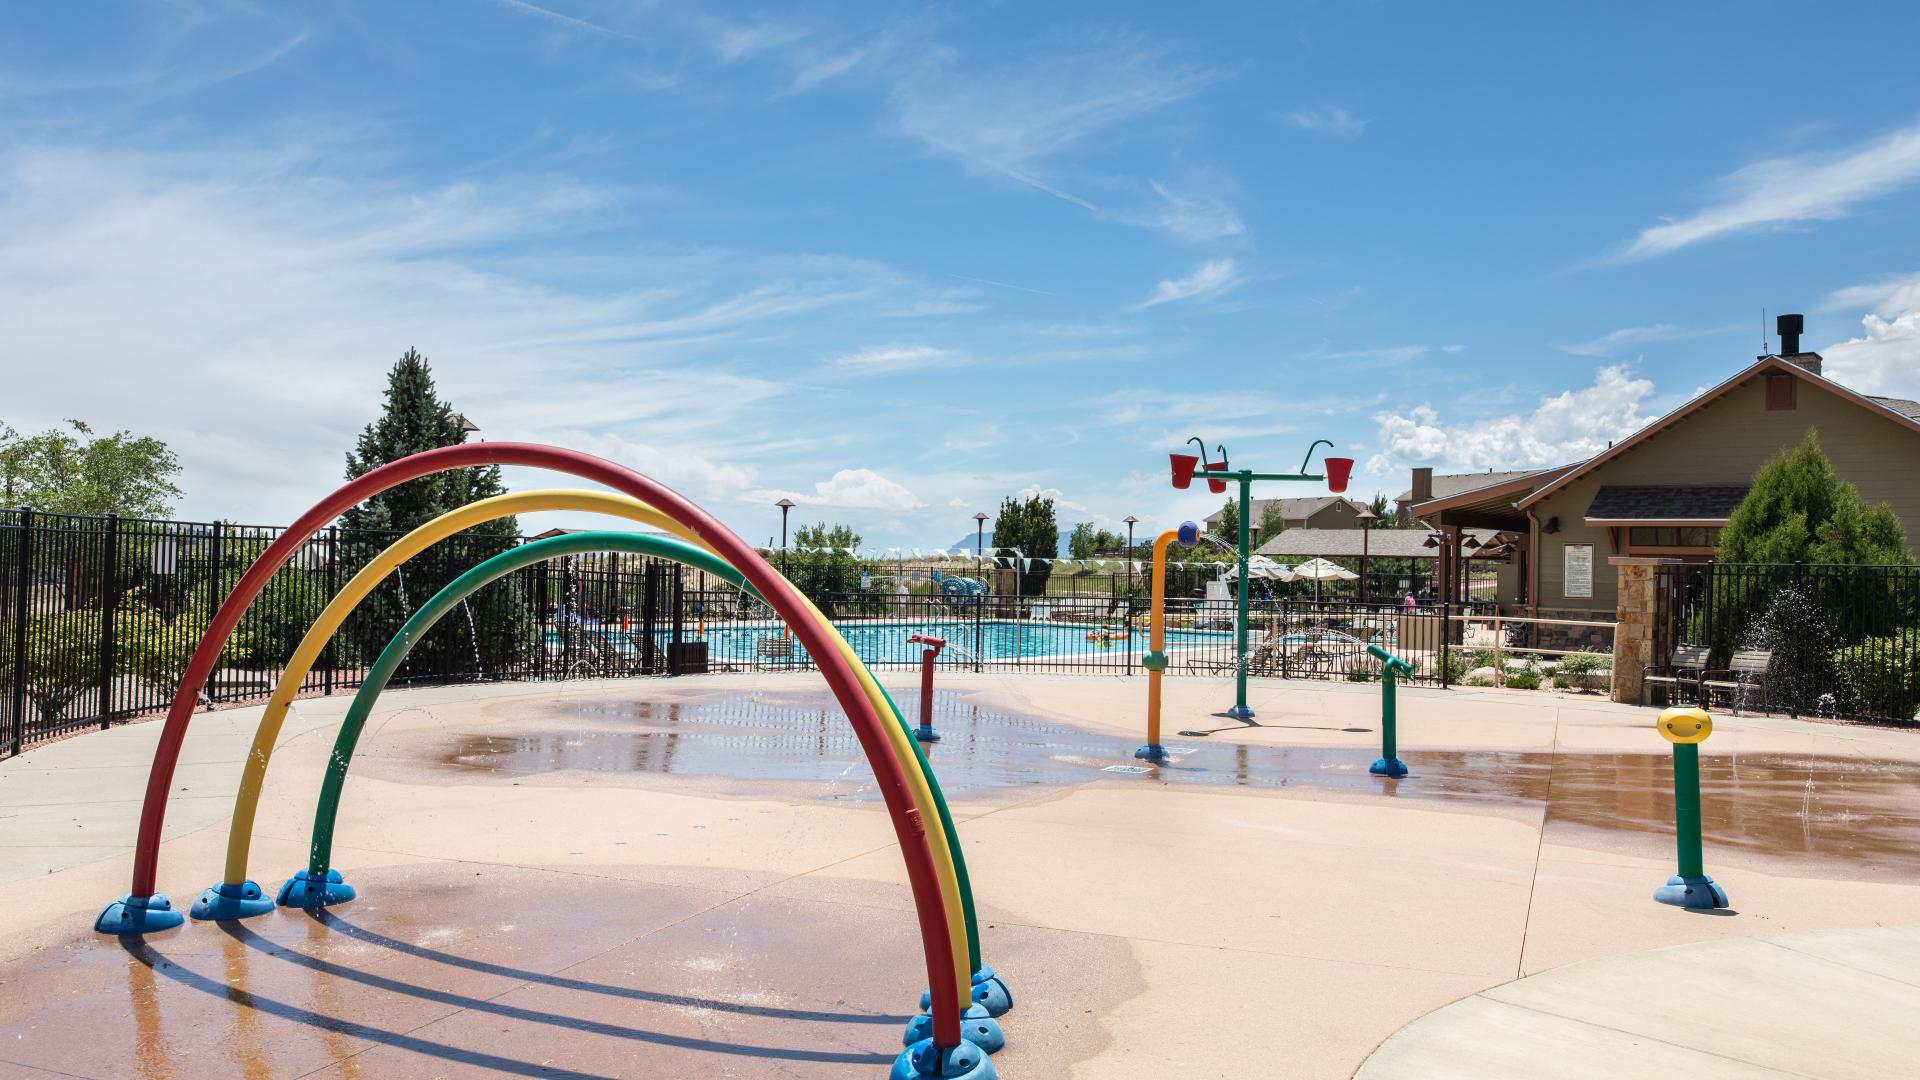 Spend summer days with family at the community pool and splash zone